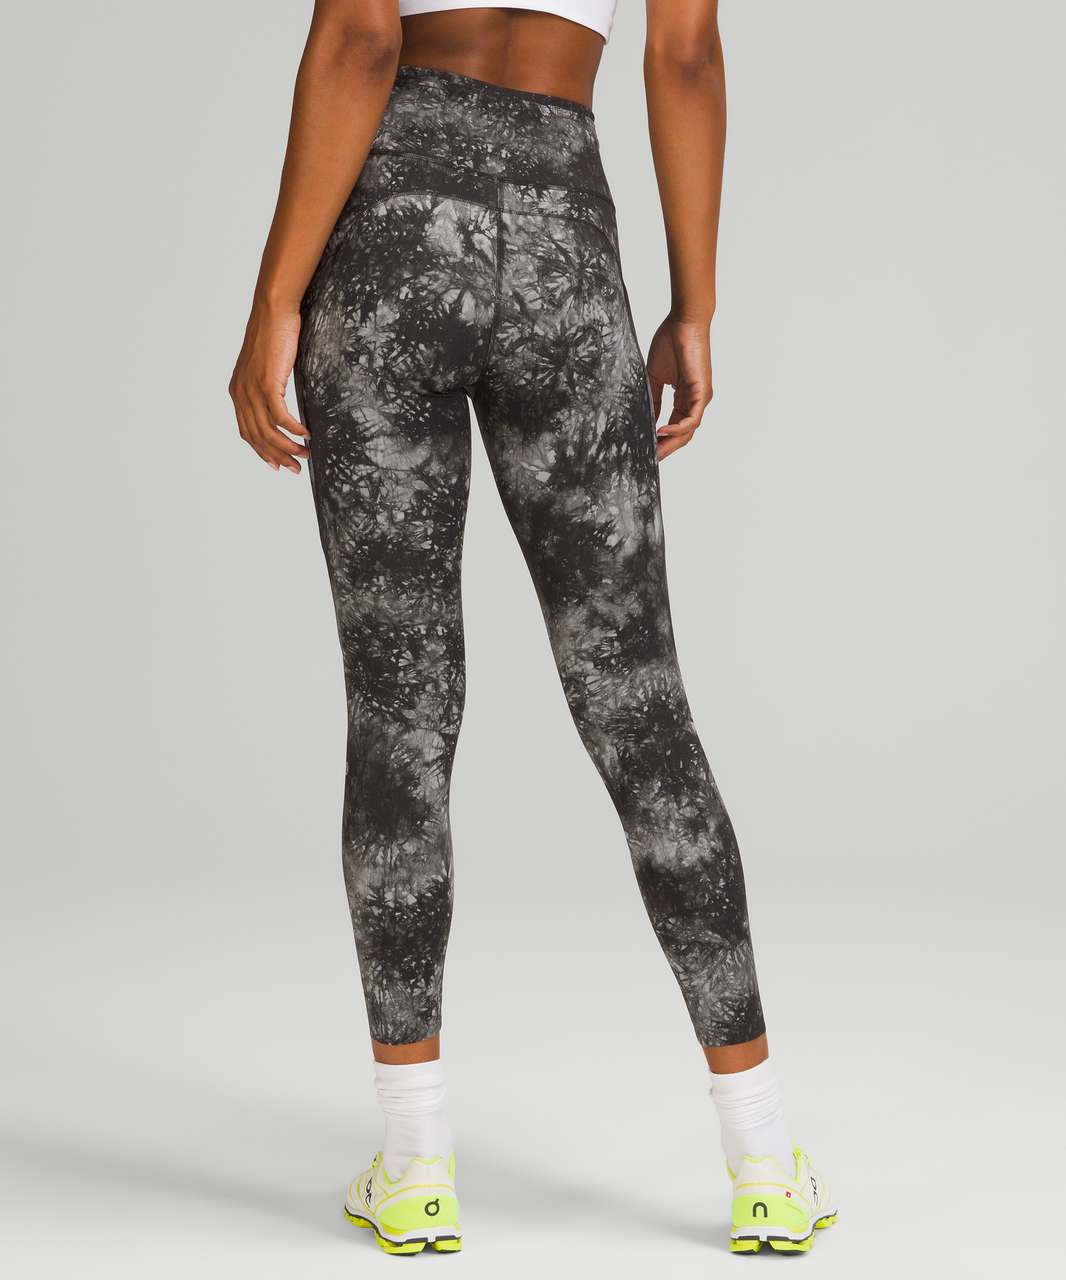 Lululemon Fast and Free High-Rise Tight 25" *Nulux - Ink Vapor Ice Grey Multi